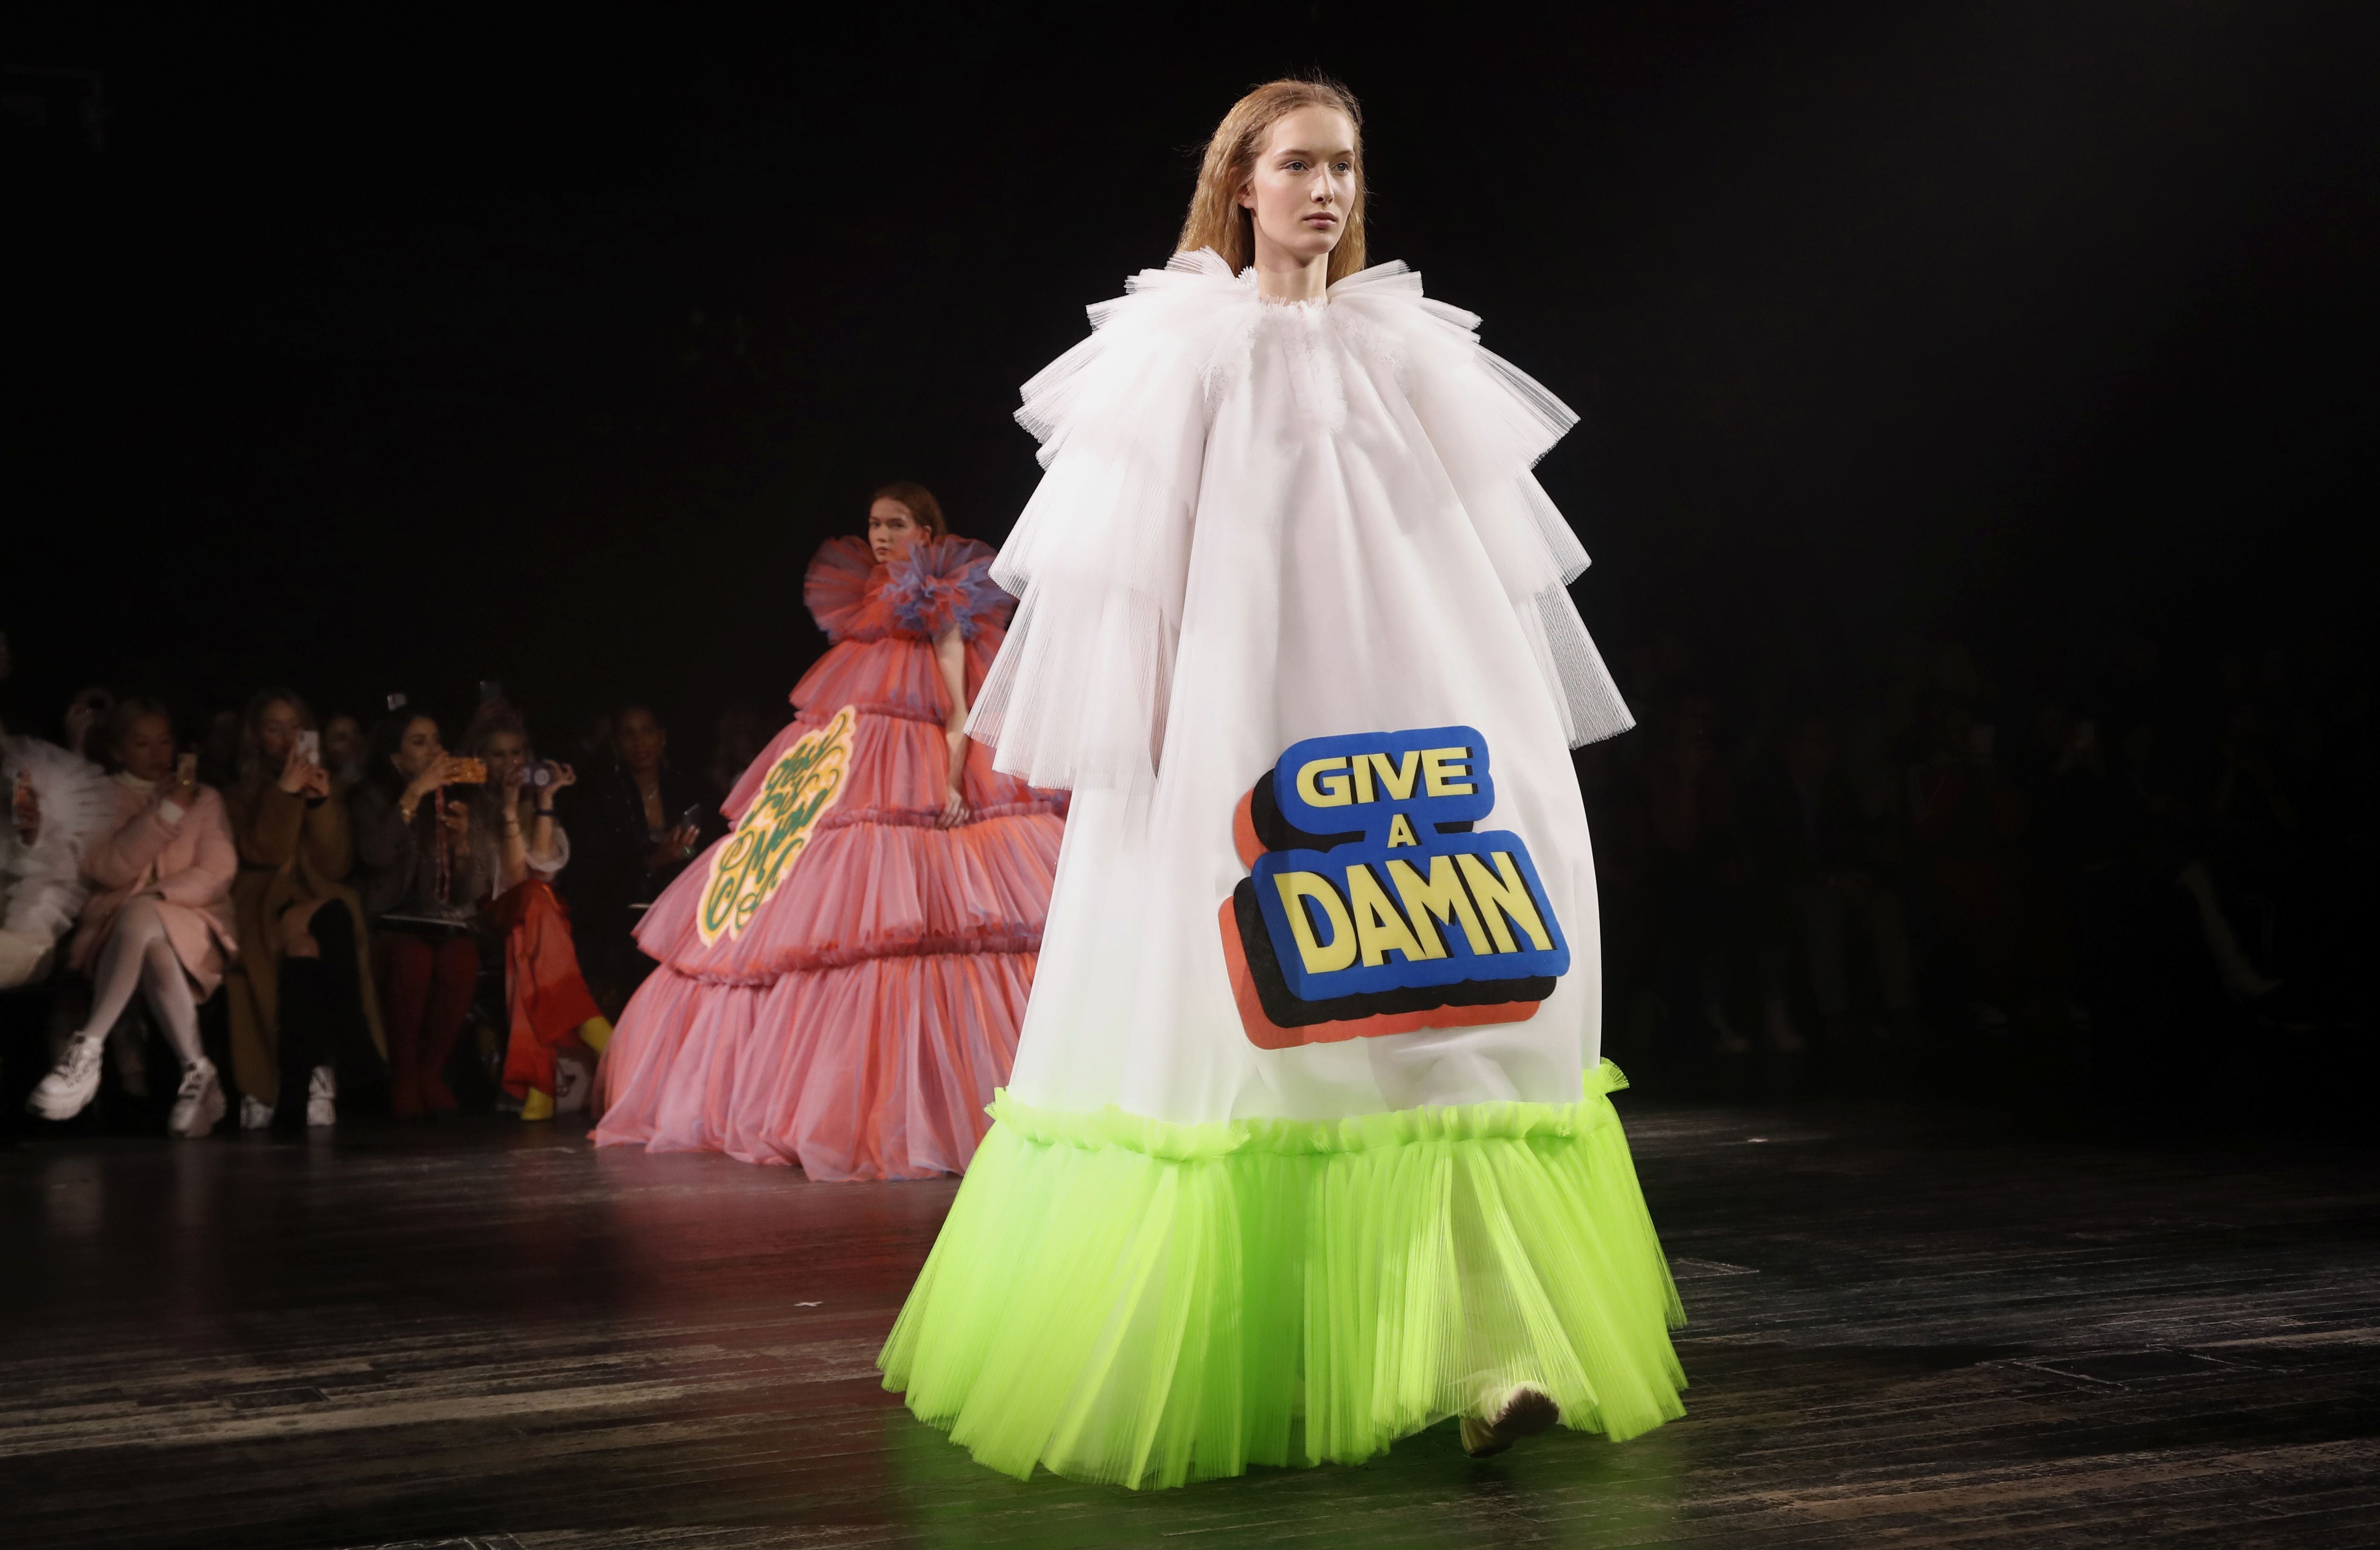 Viktor & Rolf's Spring Summer 2019 couture Fashion Statements